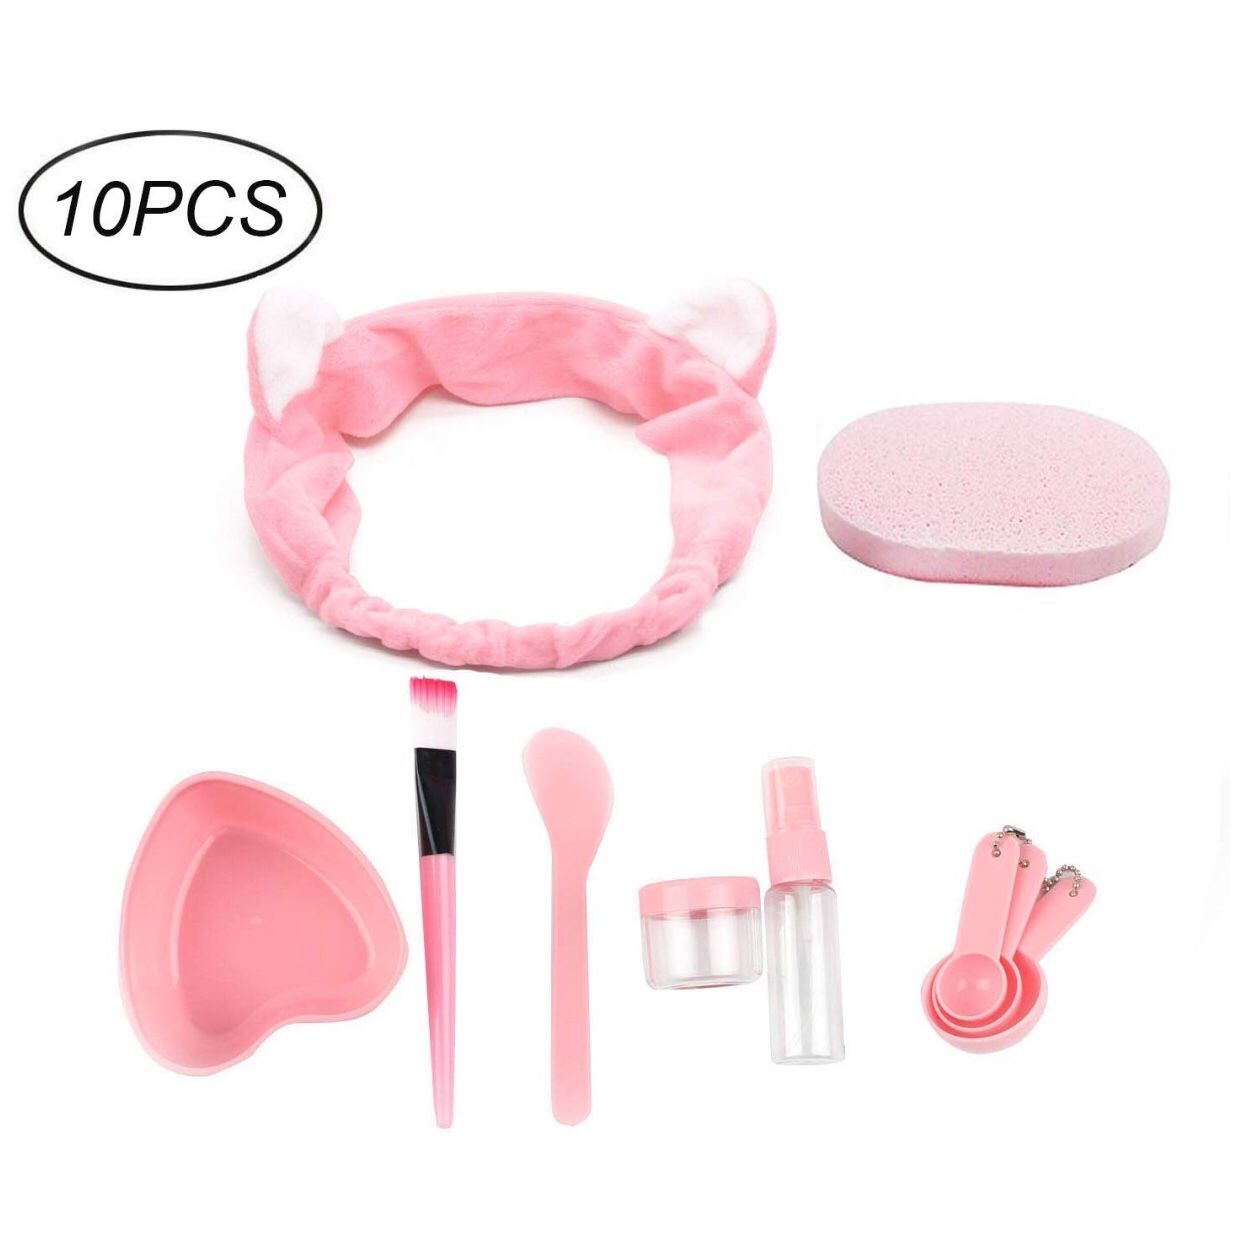 Facial Mask Bowl 10 in 1 Cat Shape Headband Spray Brush Stick Spatula Puff Measure Spoon Lady face Skin Care Mask Mixing Tool Sets